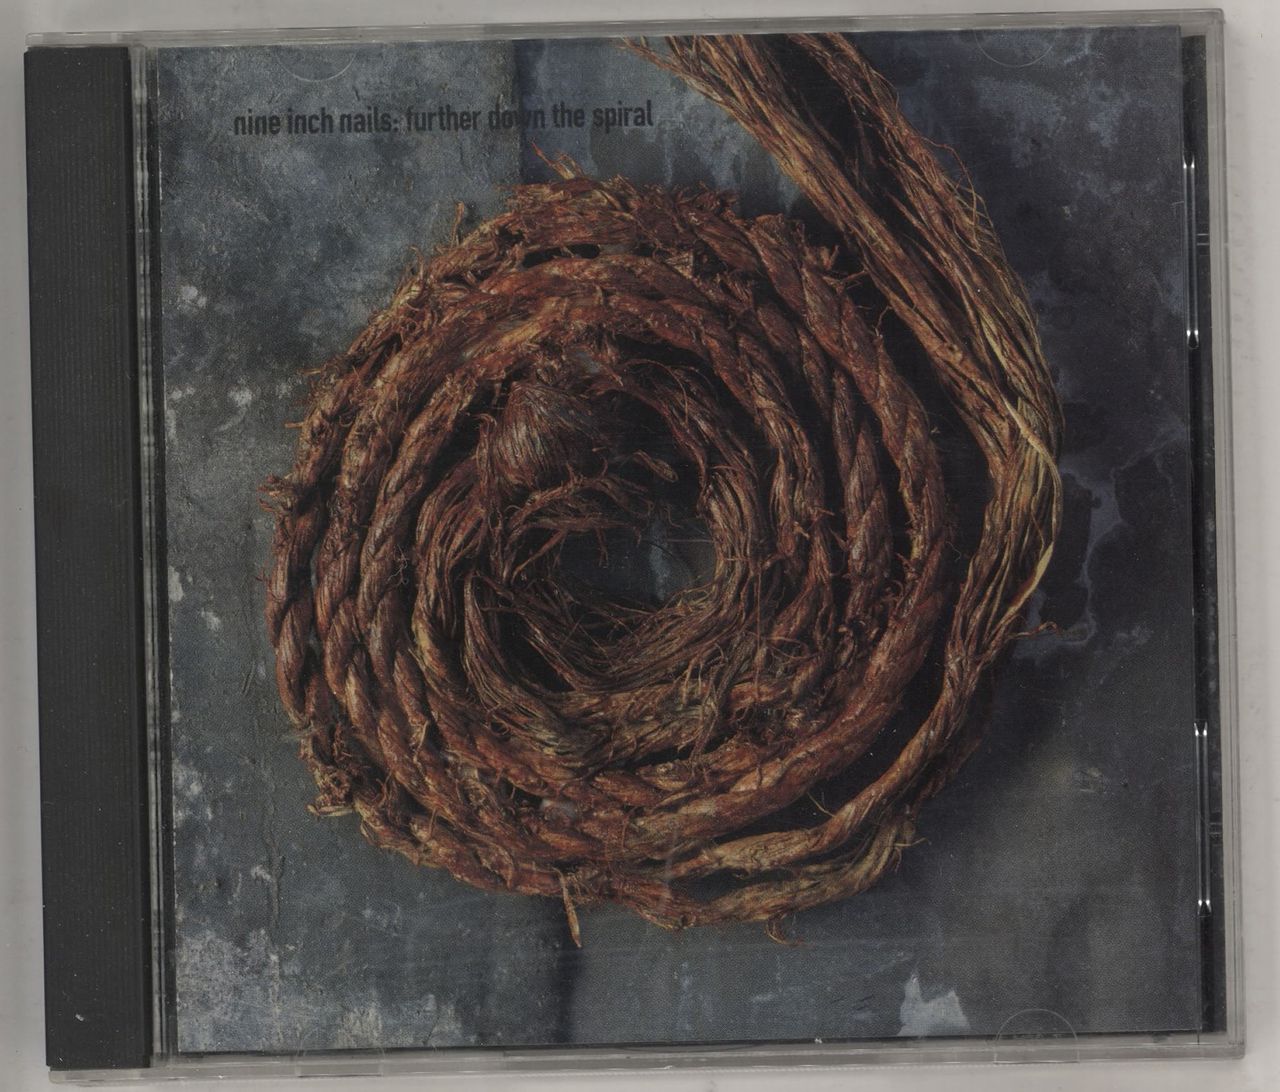 Nine Inch Nails Further Down The Spiral US CD album